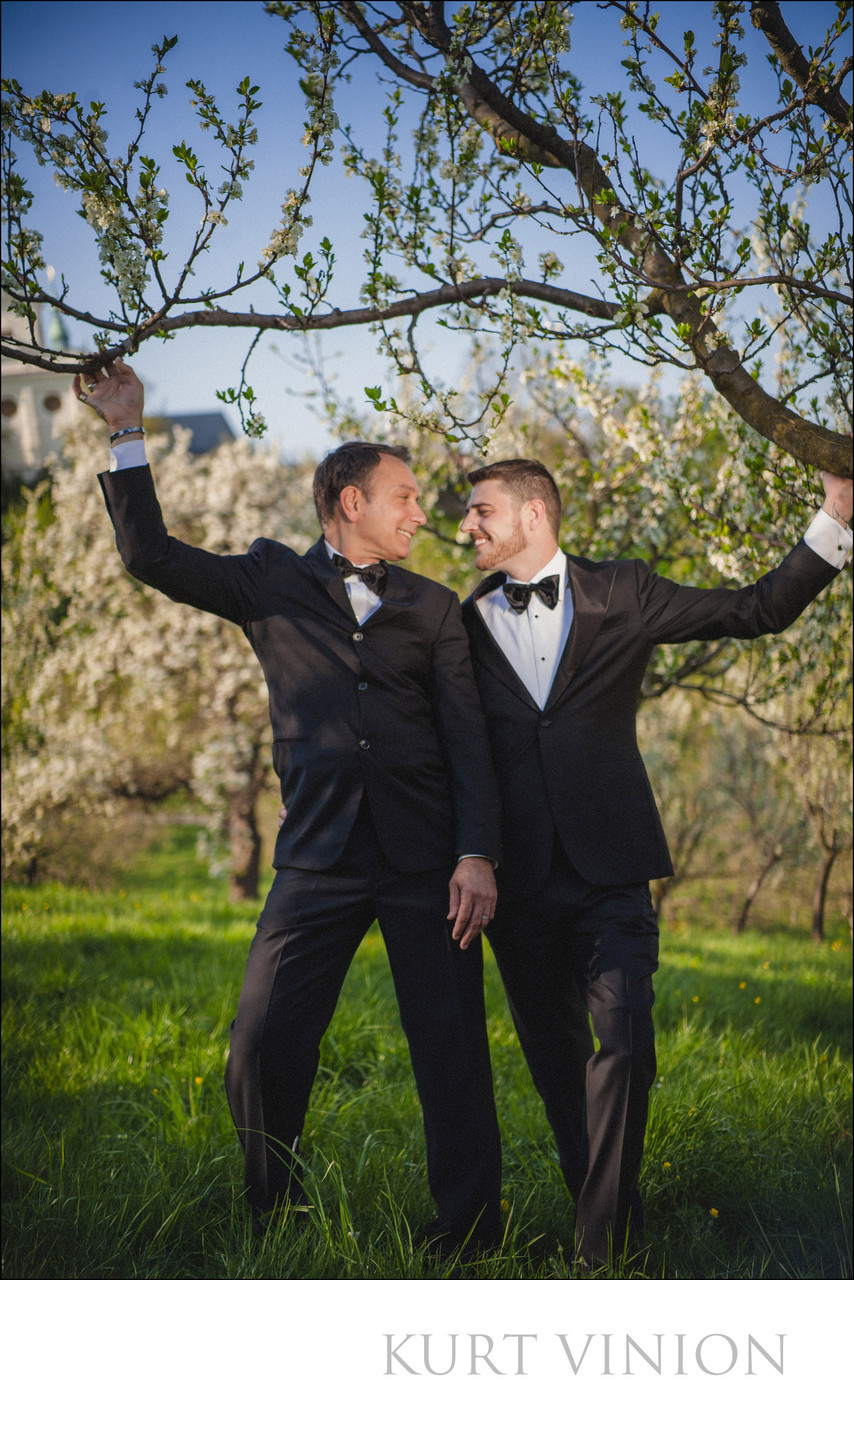 Two sexy guys dressed in tuxedos Prague engagement